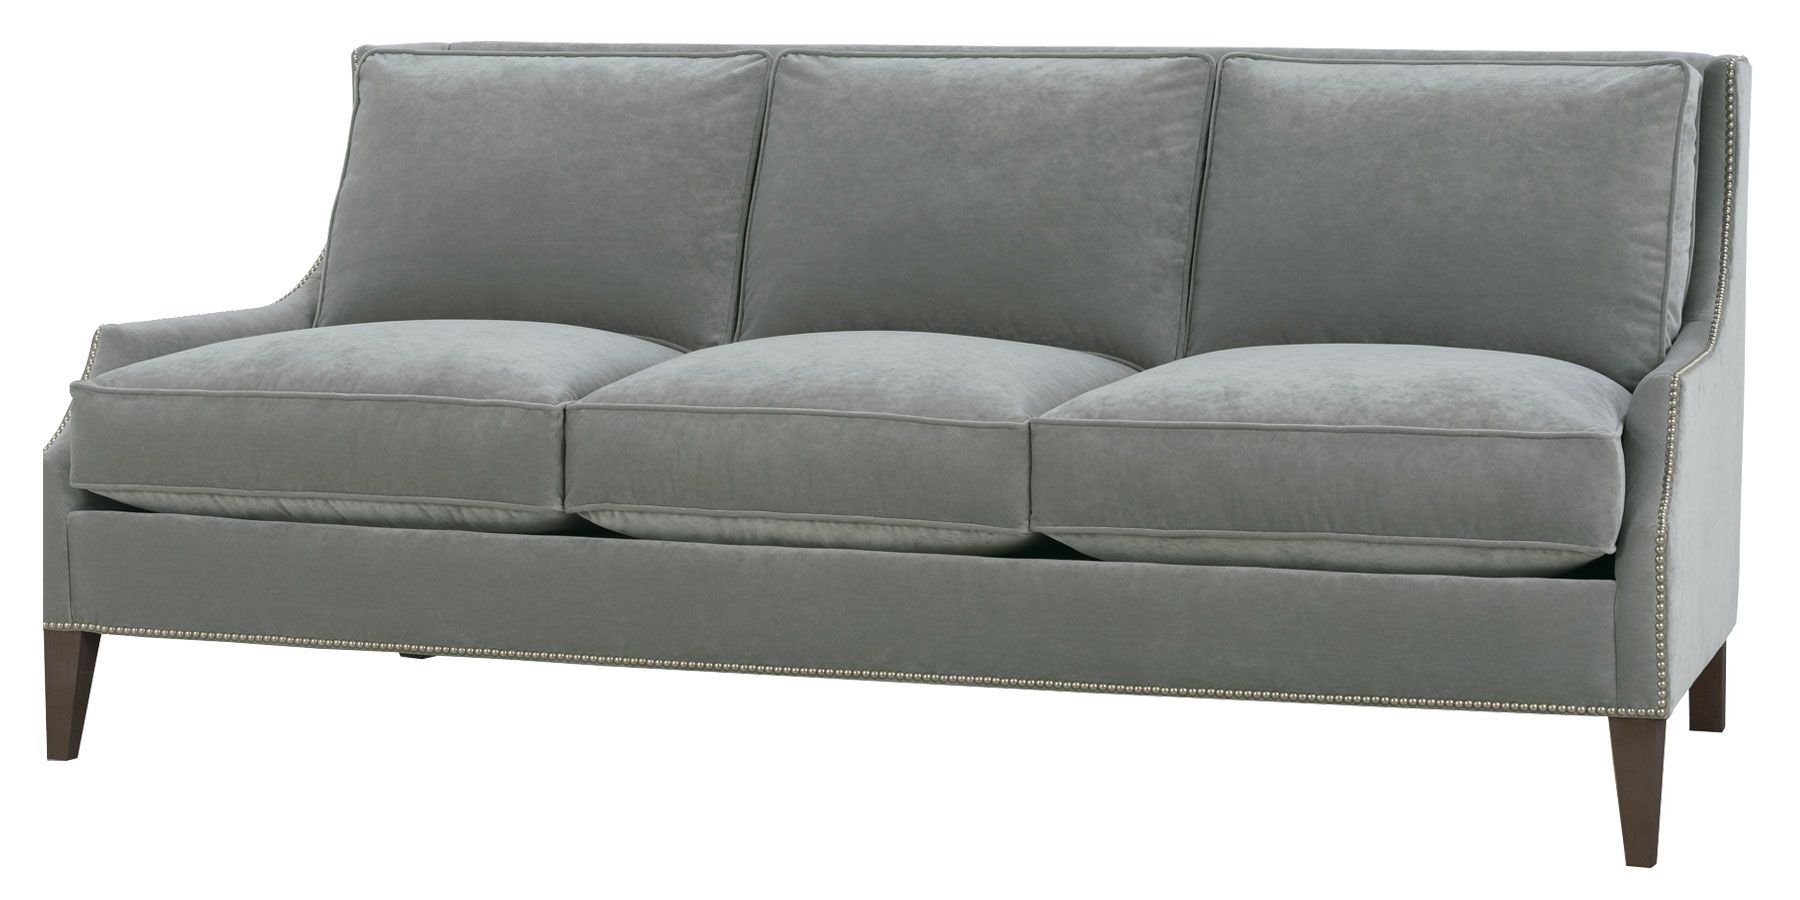 Awesome Apartment Size Sofa 36 About Remodel Office Sofa Ideas For Most Recent Apartment Size Sofas (View 1 of 20)